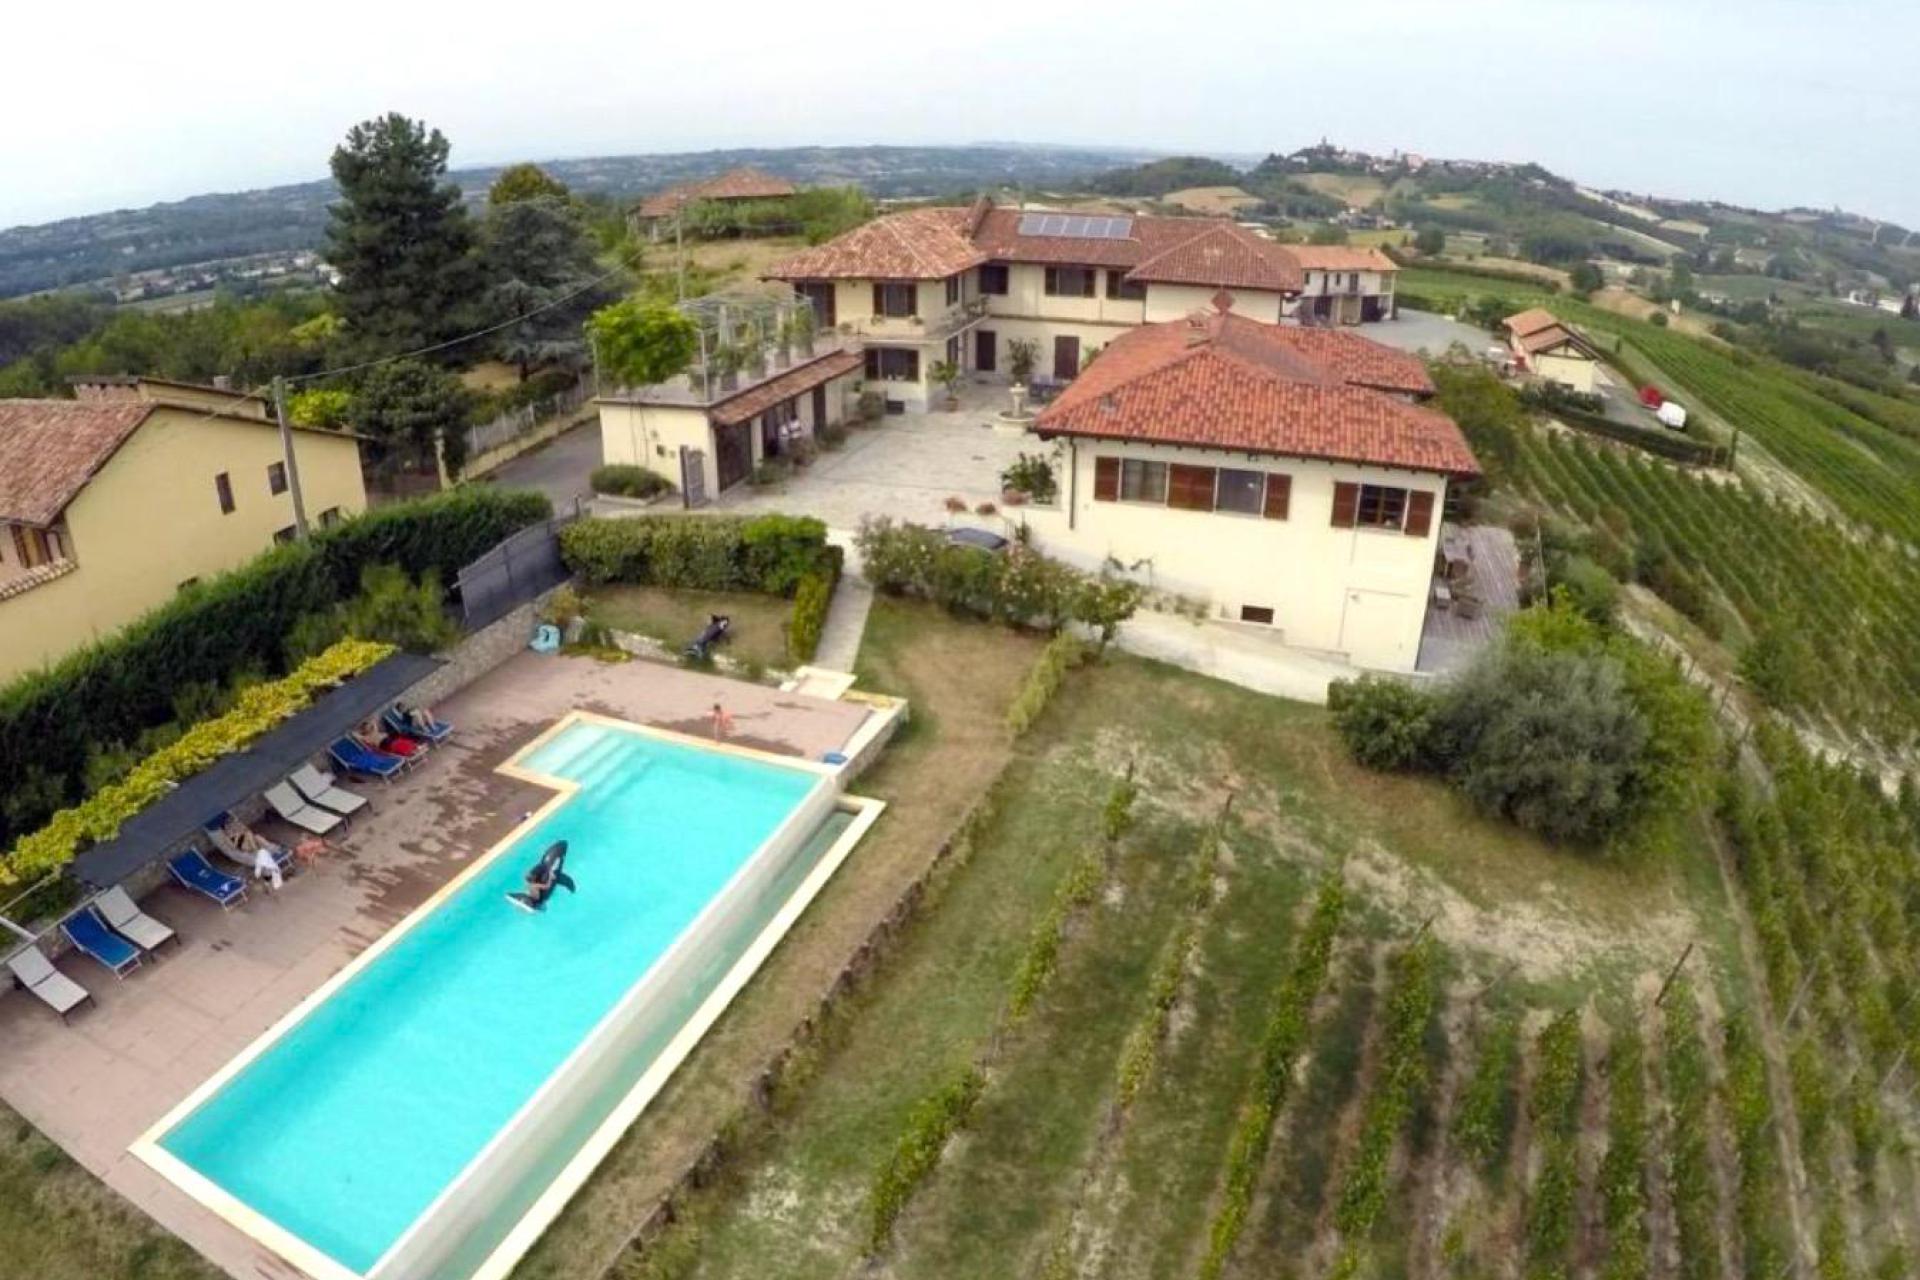 Agriturismo - Farmhouse and winery in the Piedmont hills